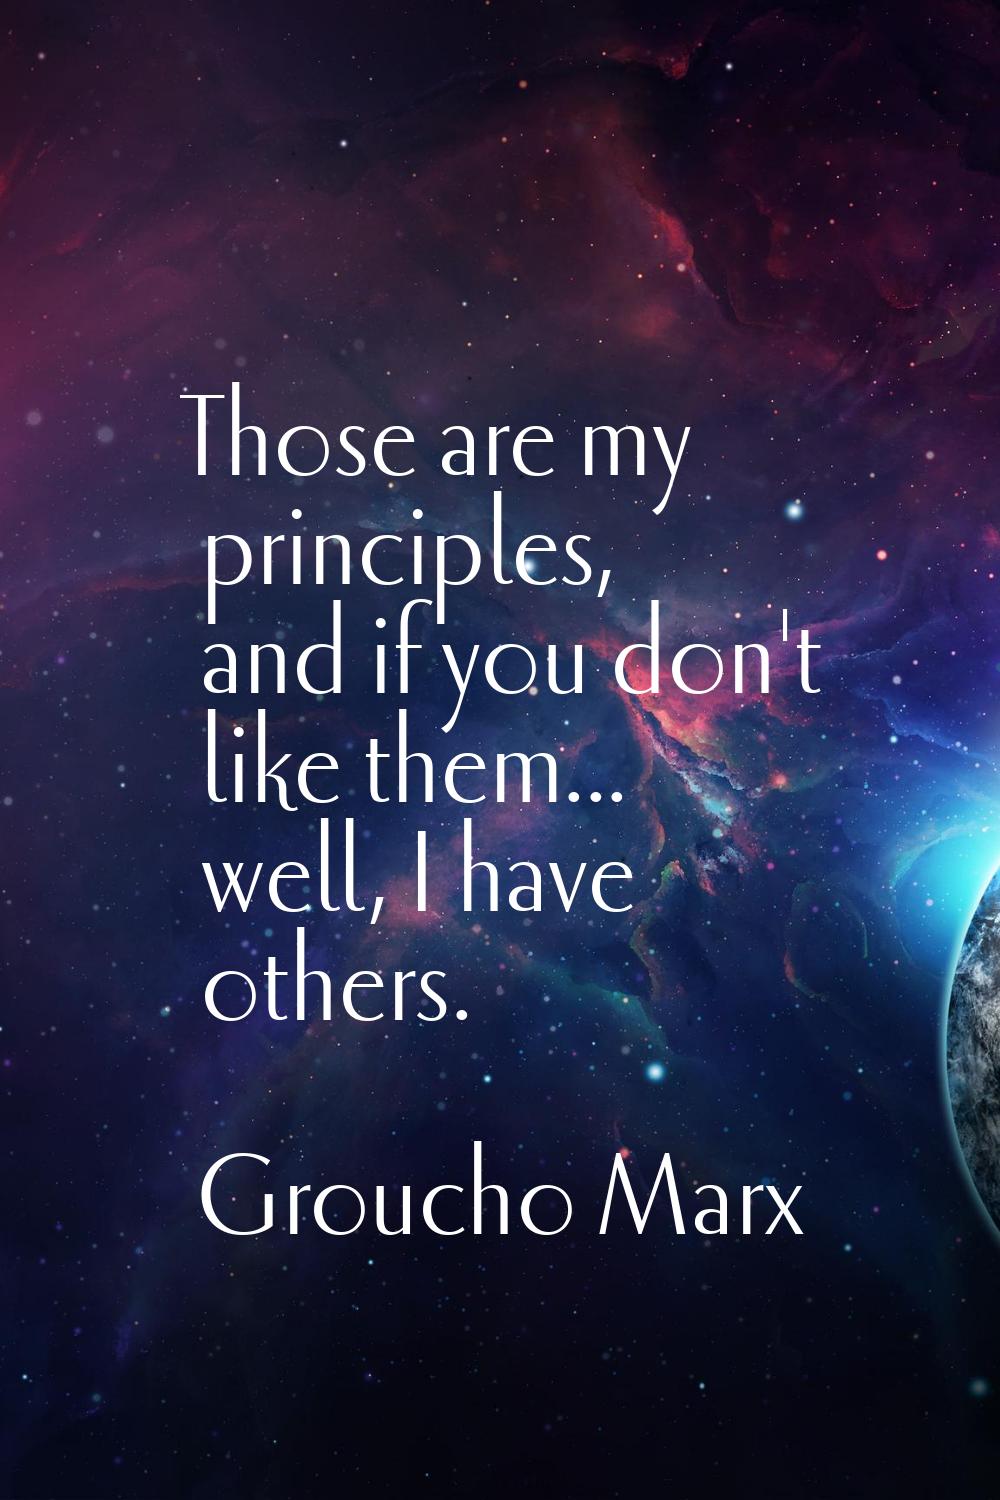 Those are my principles, and if you don't like them... well, I have others.